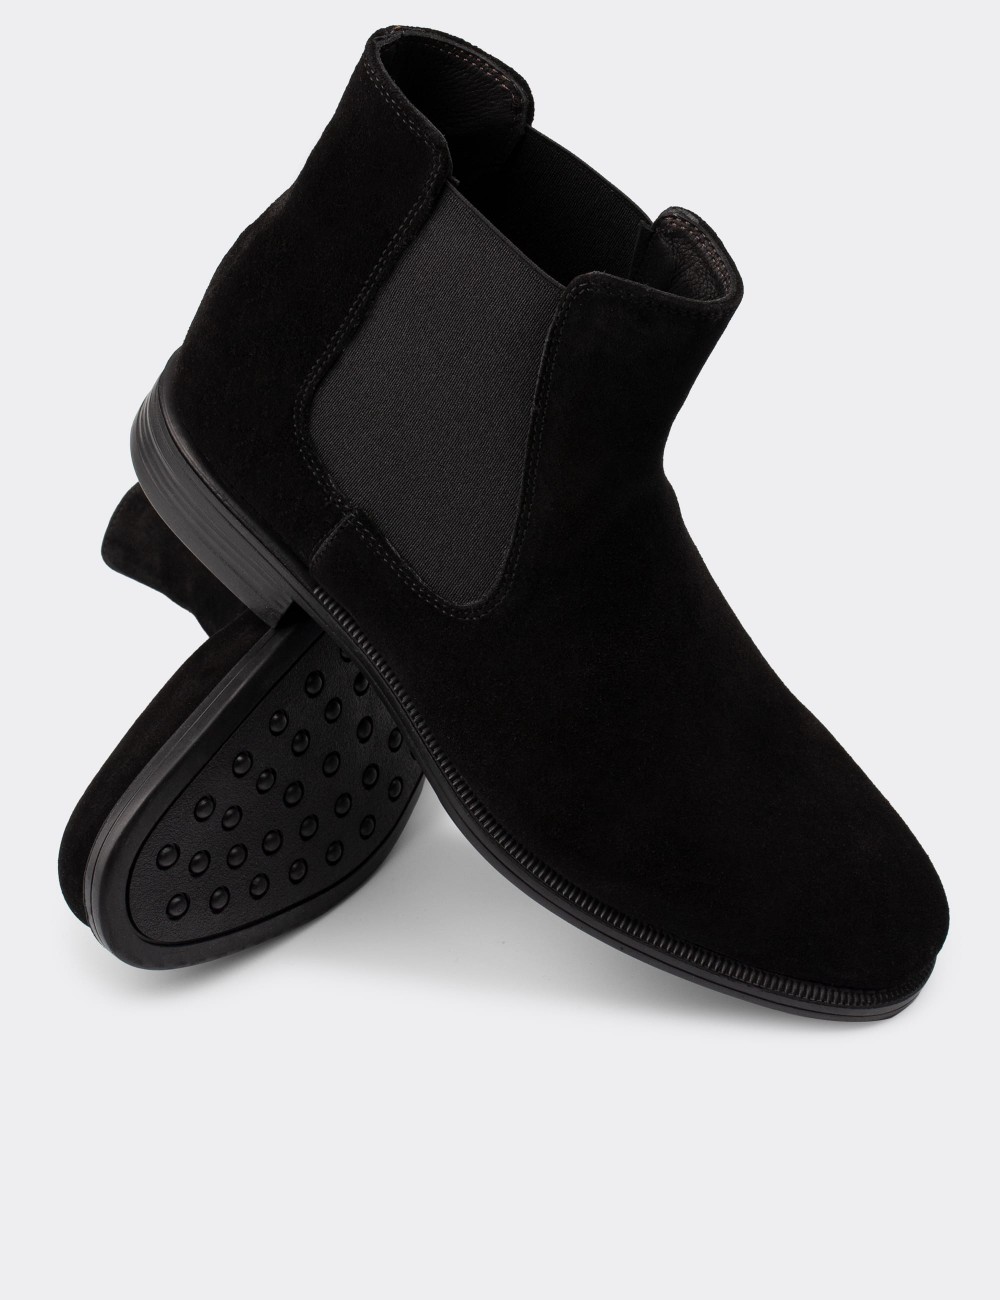 Black Suede Leather Chelsea Boots - 01849MSYHC02